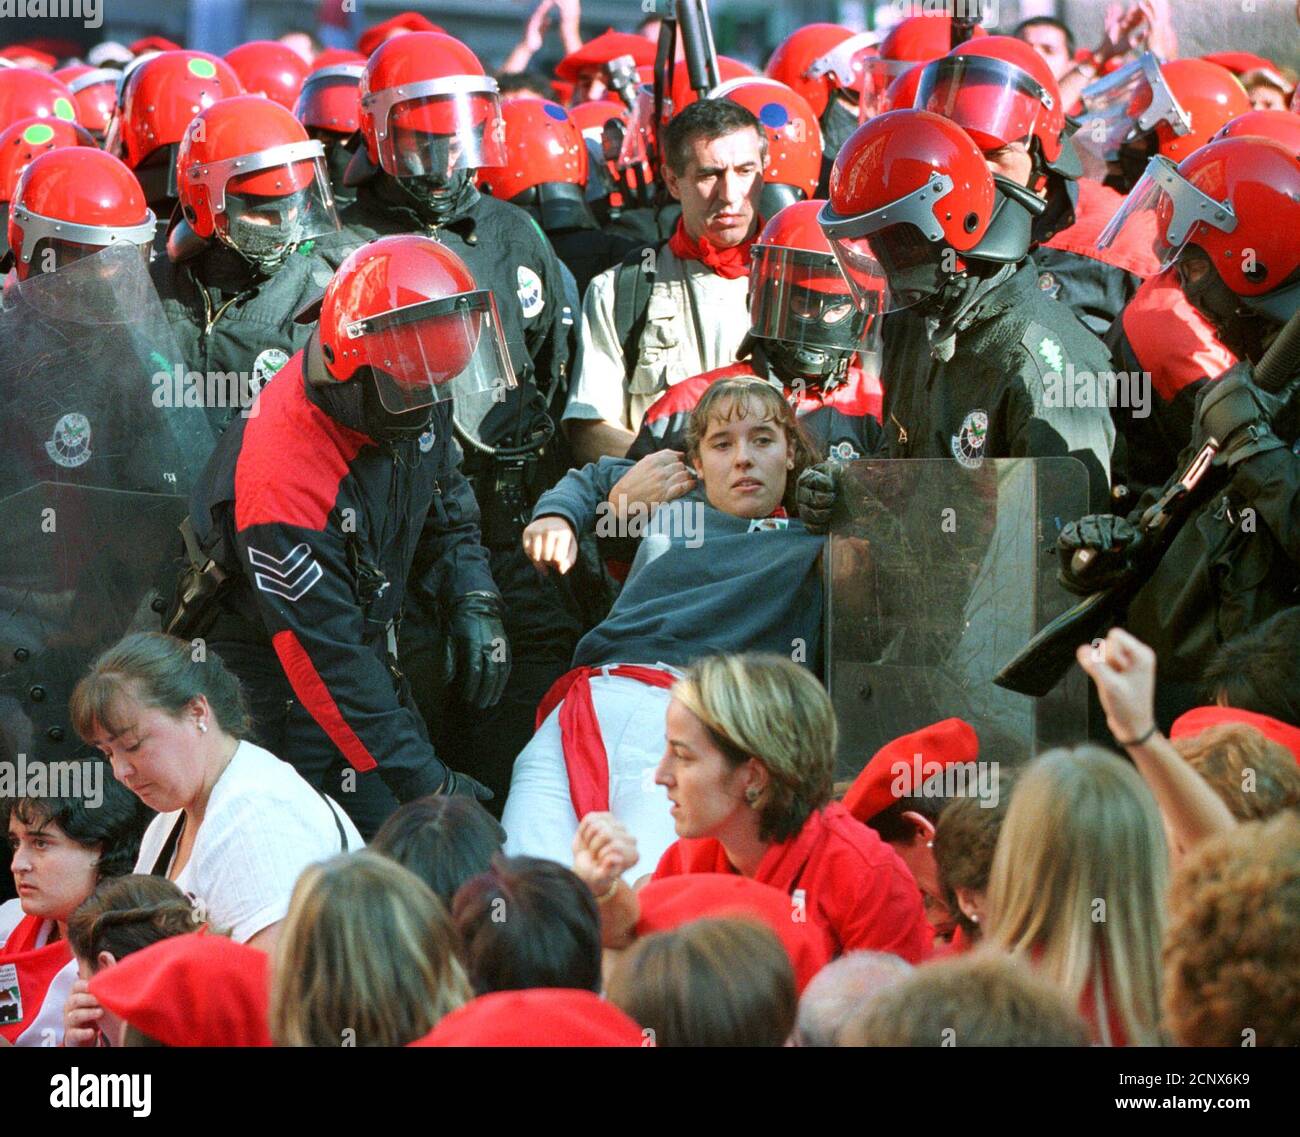 Basque policemen detain a group of women blocking a road during a march of traditionalists in the town of Hondarribia September 8, 2000. Police detained over 20 women. Traditionalist groups succeeded in preventing the participation of women in the all-male 'Alarde', a yearly parade celebrating an ancient war against French soldiers.  ES Stock Photo